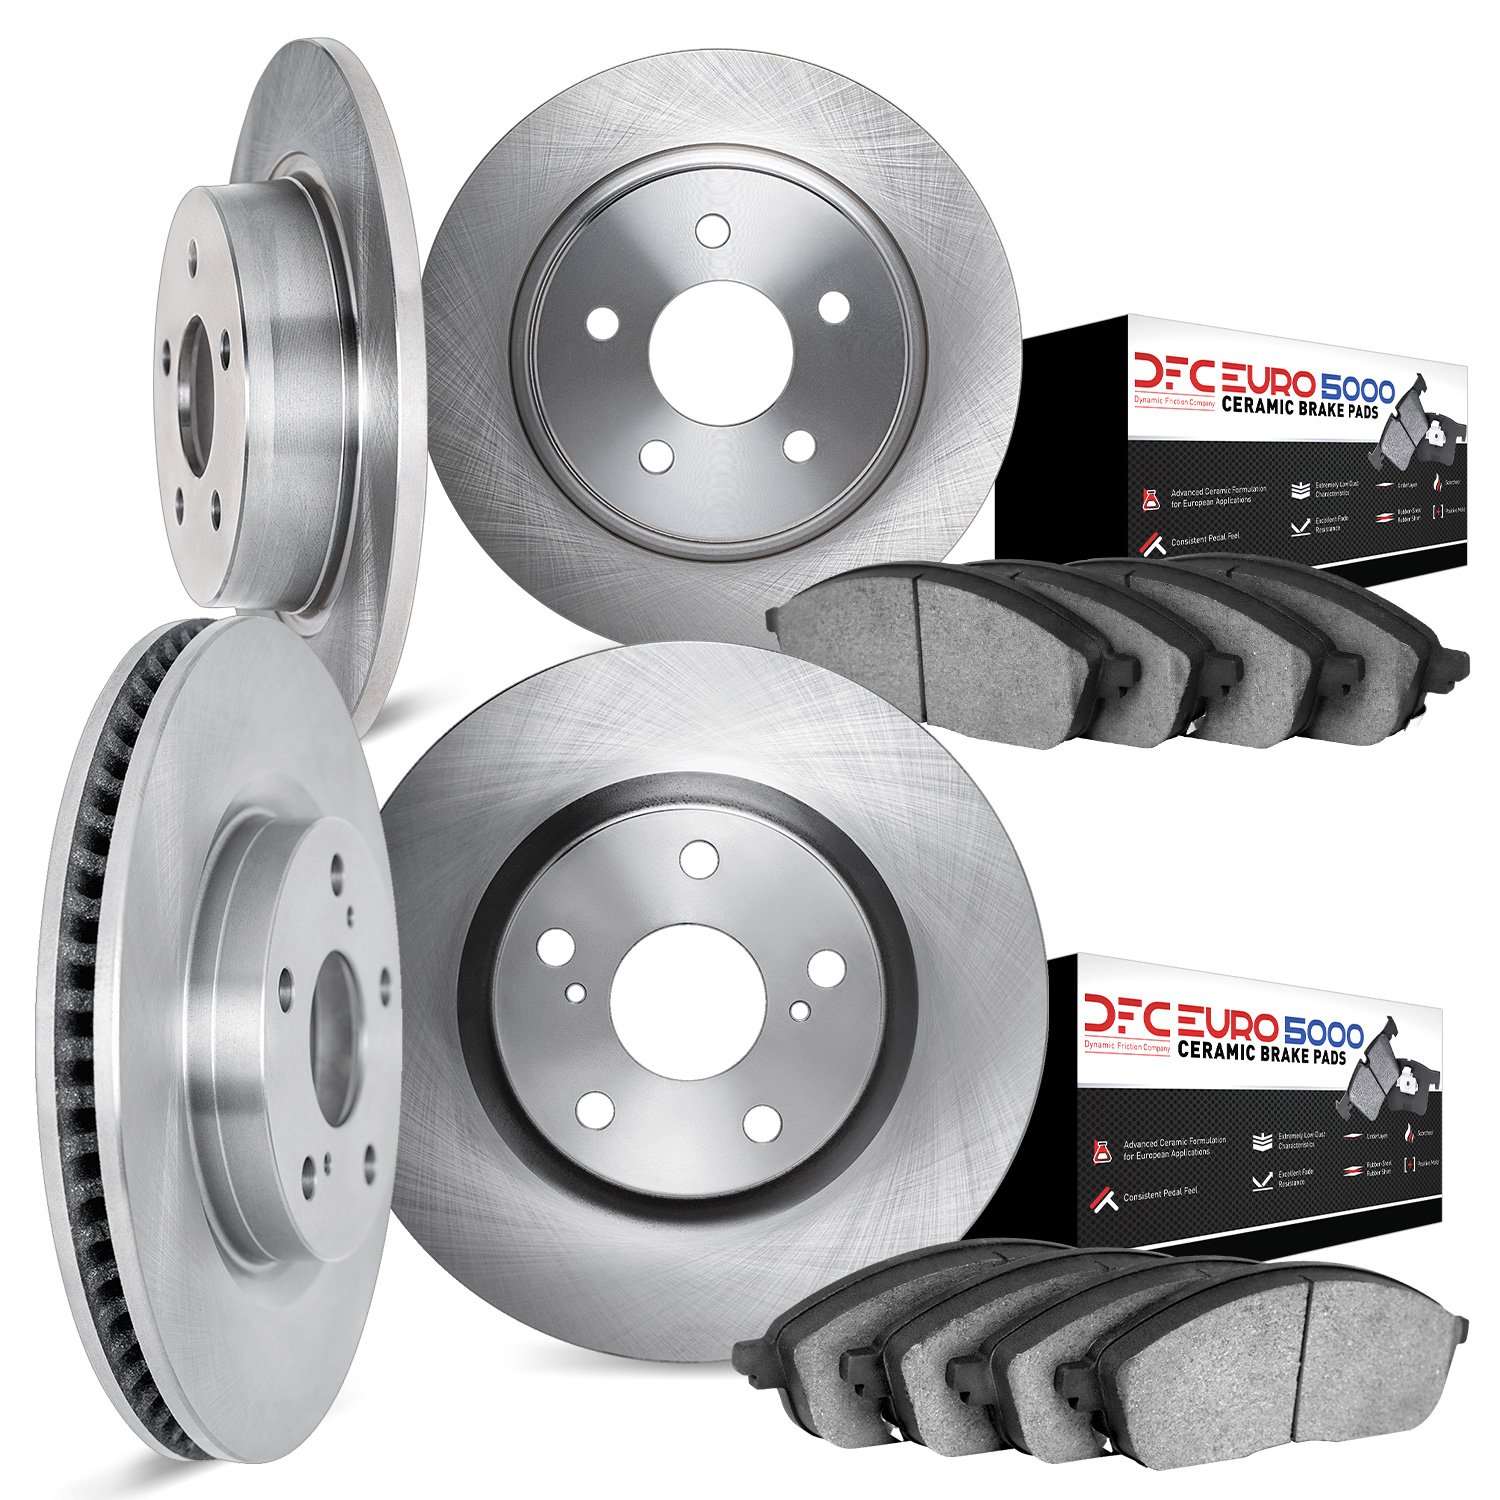 6604-63012 Brake Rotors w/5000 Euro Ceramic Brake Pads, 2006-2011 Mercedes-Benz, Position: Front and Rear